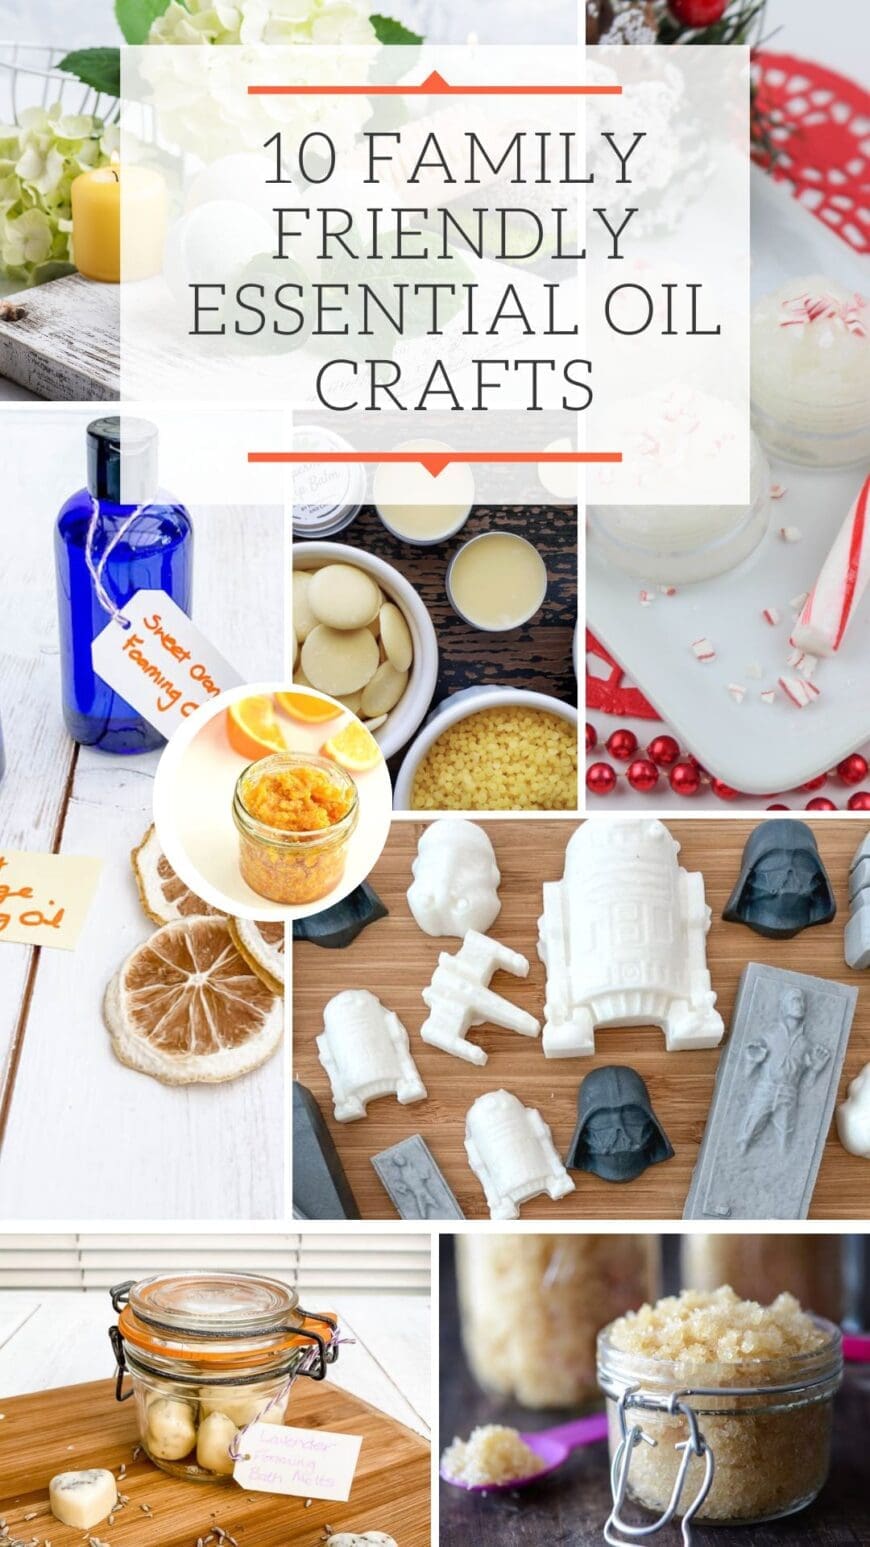 Check out our favorite family-friendly essential oil crafts.  Super fun DIY crafts including lip balm, bath soaks, candles and soaps.